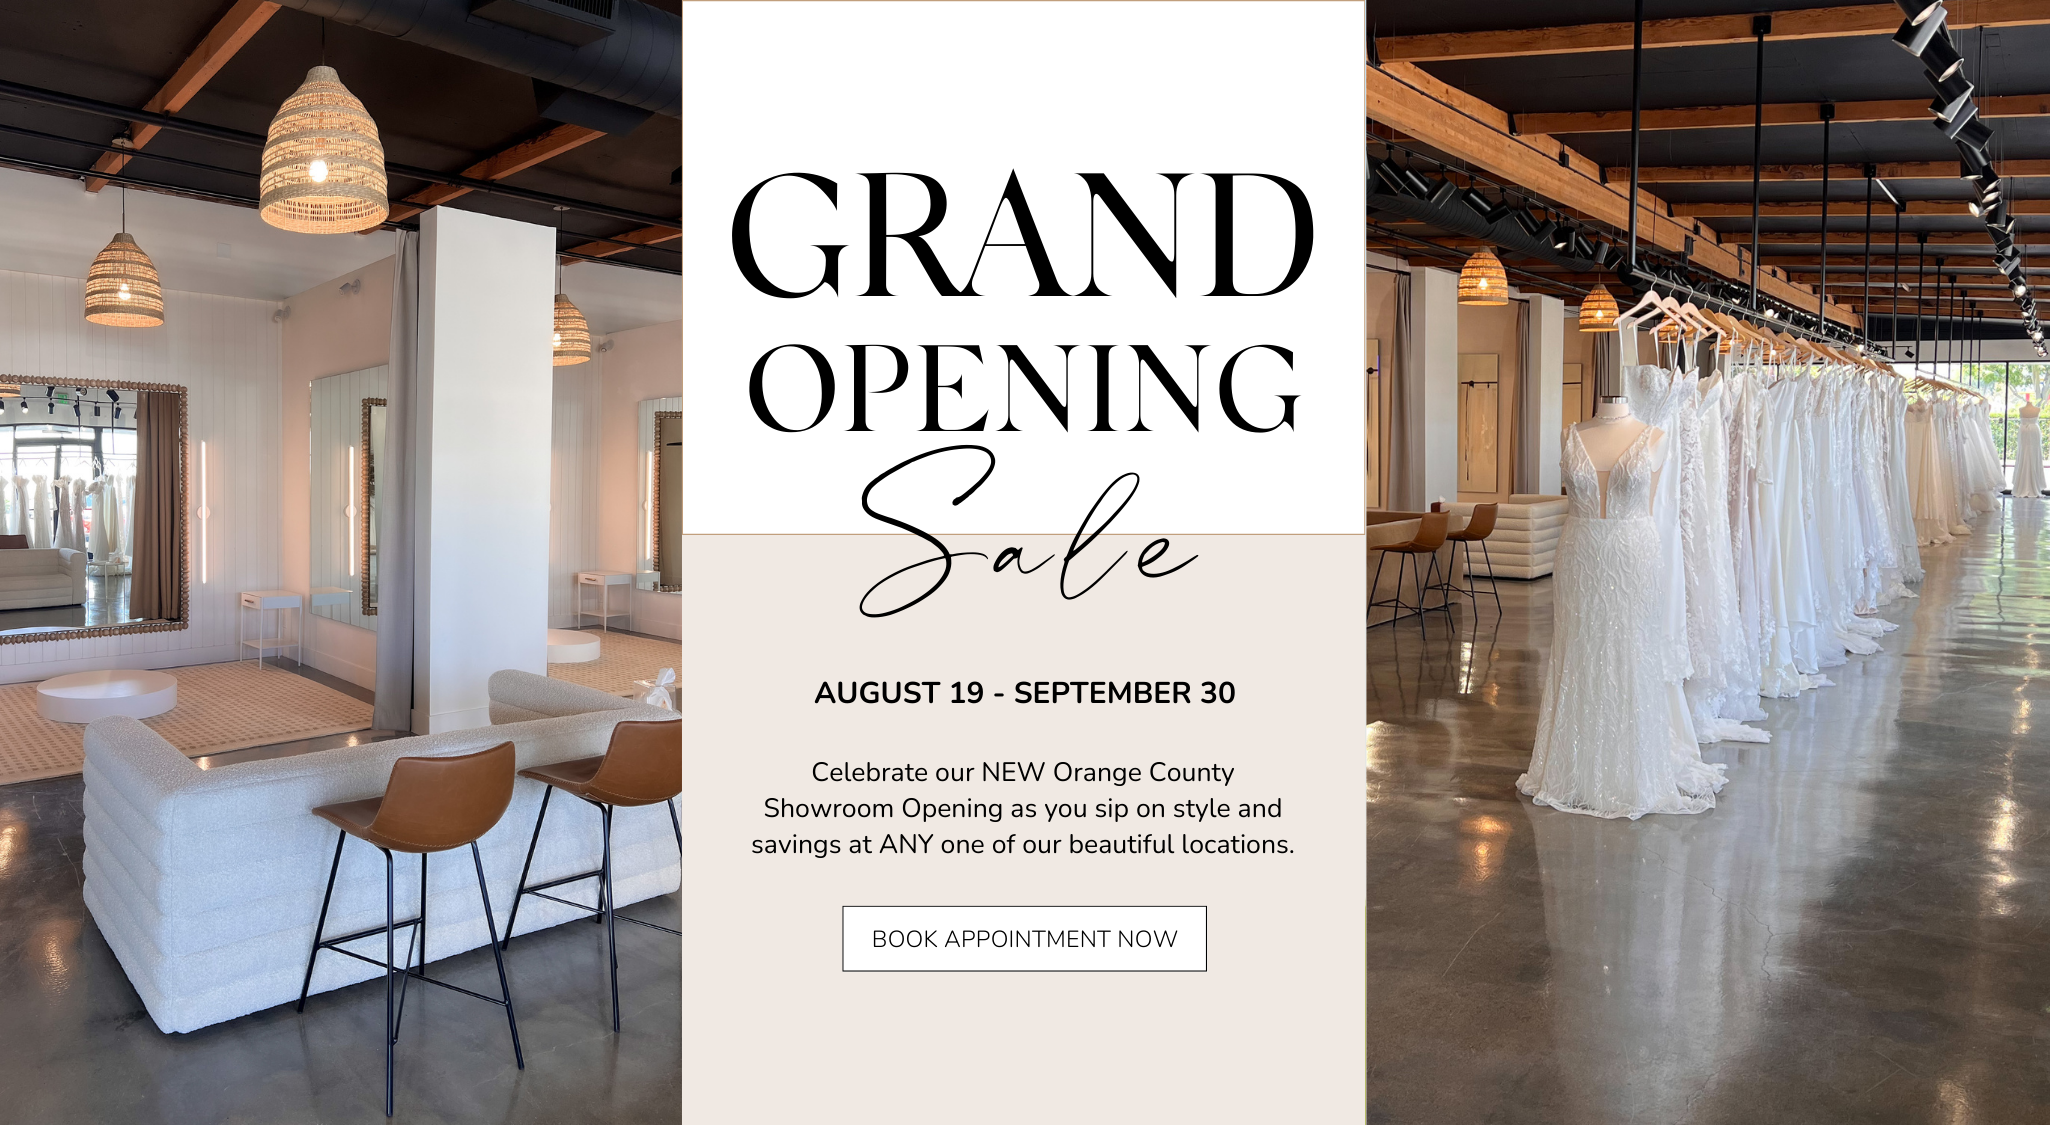 Luv Bridal Grand Opening Sale from August 19th to September 30th